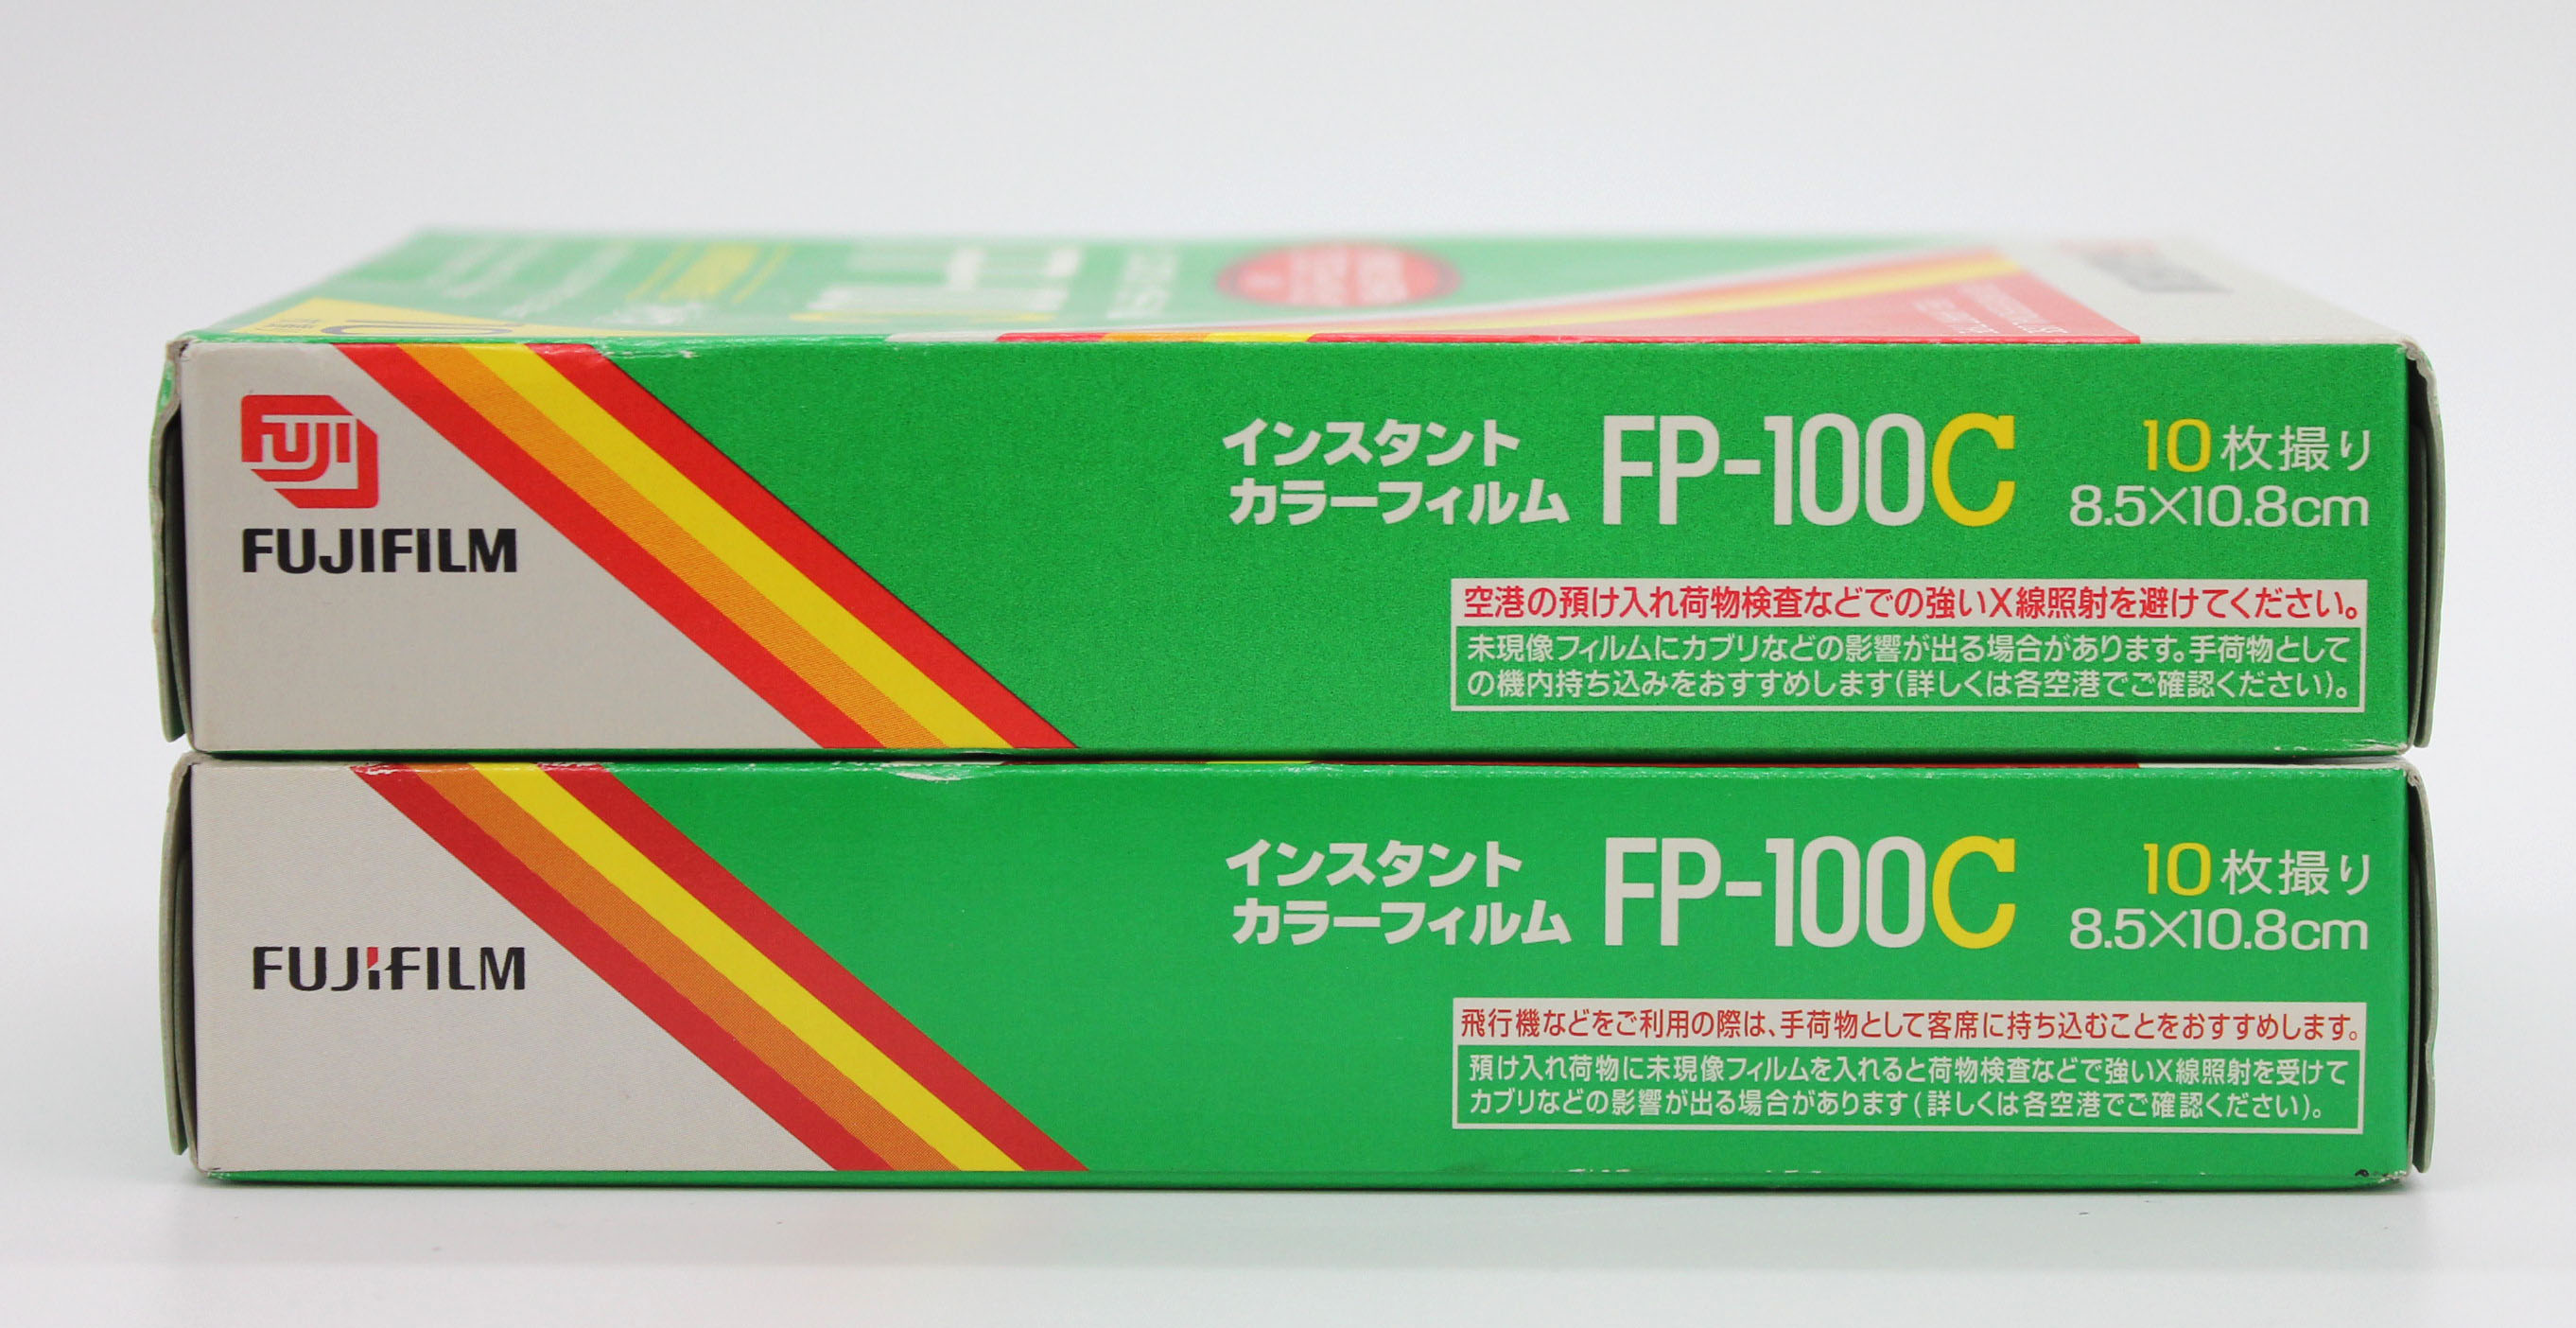  Fujifilm FP-100C Instant Color Film Set of 2 (Expired) from Japan Photo 5